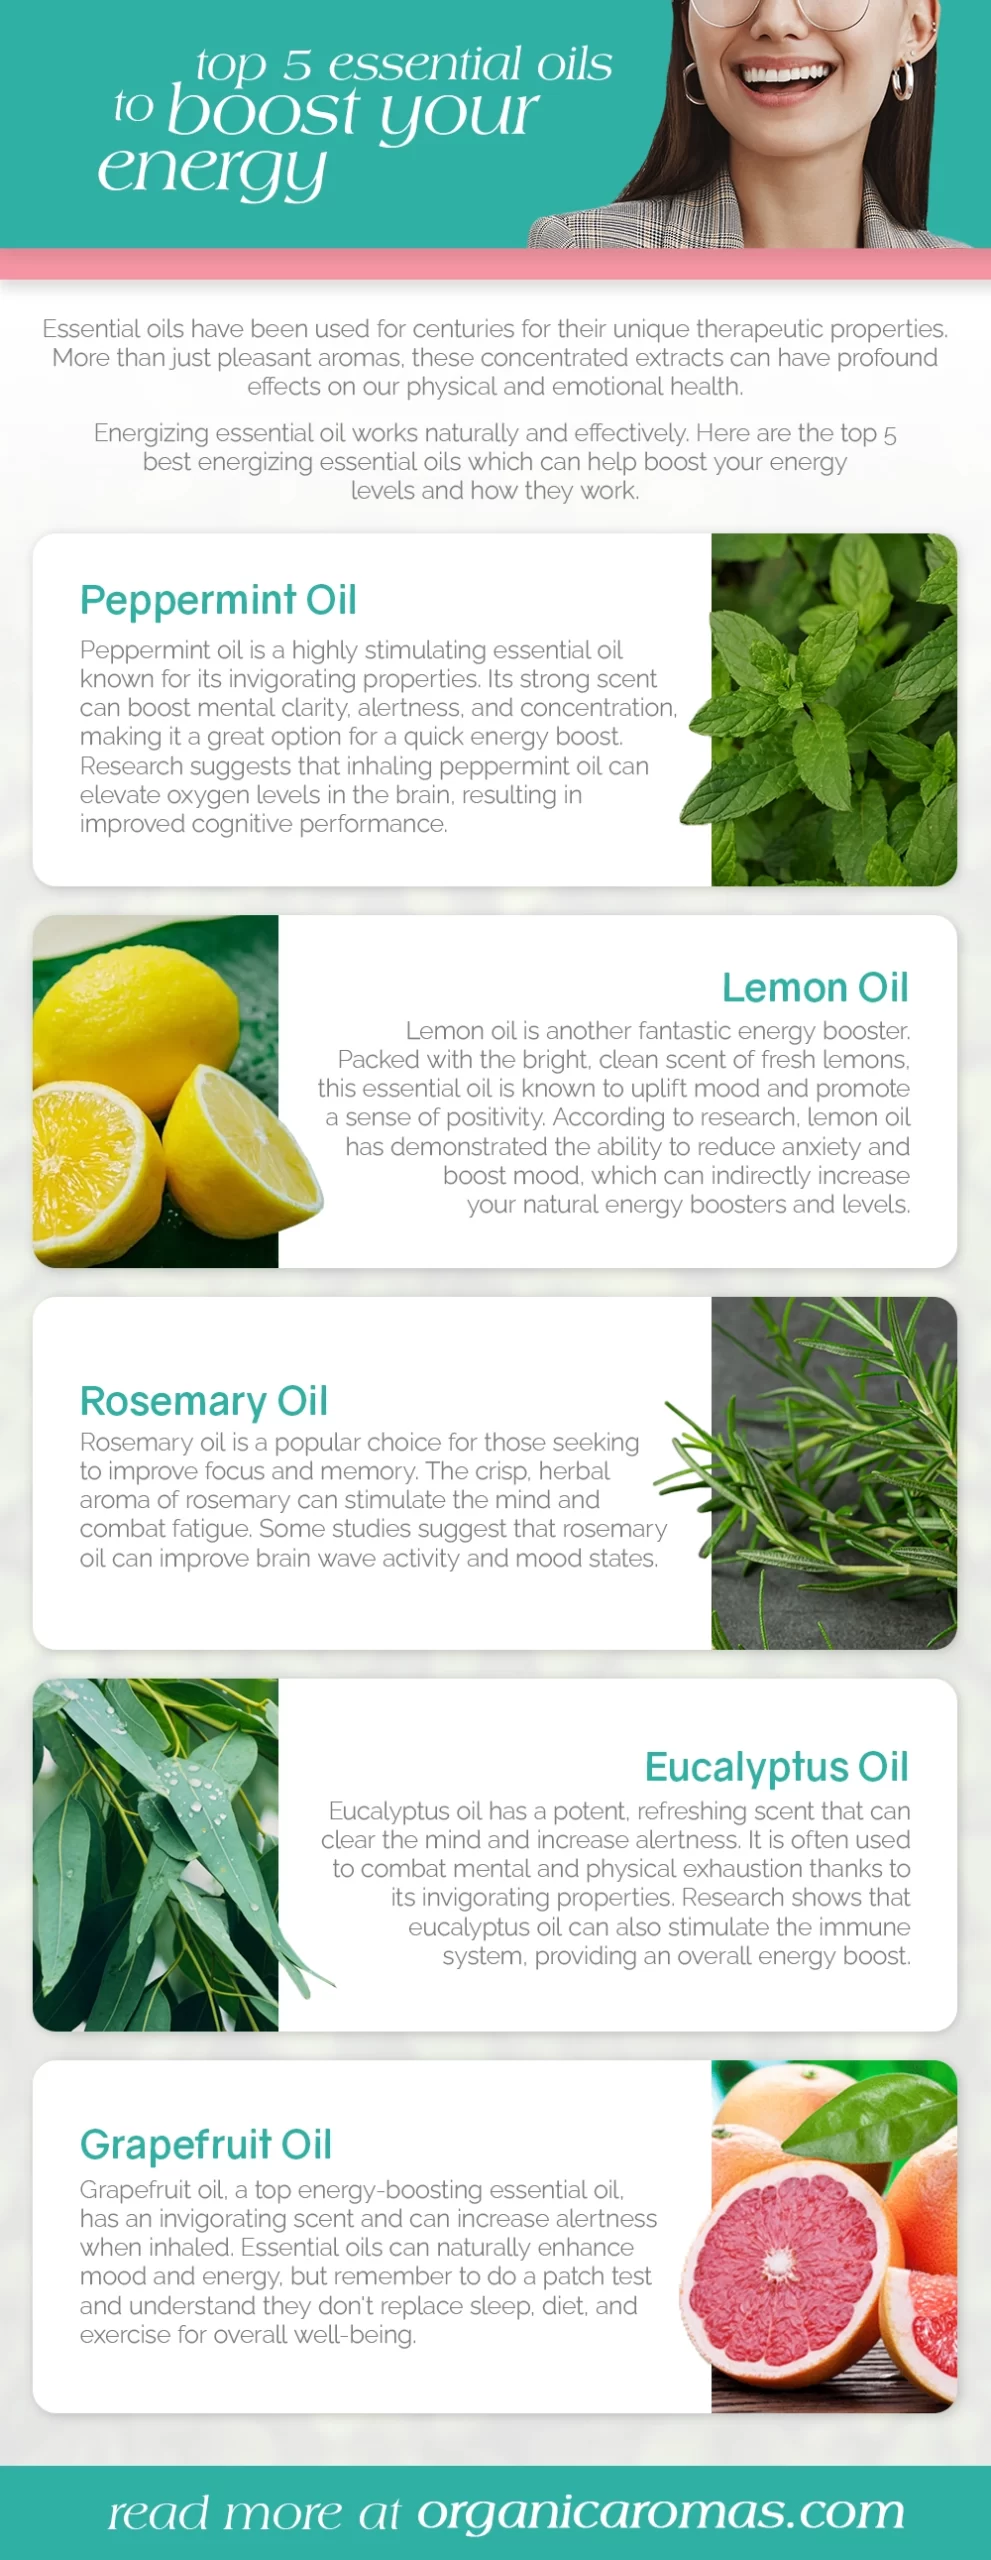 5 Essential Oils for Immune System Support